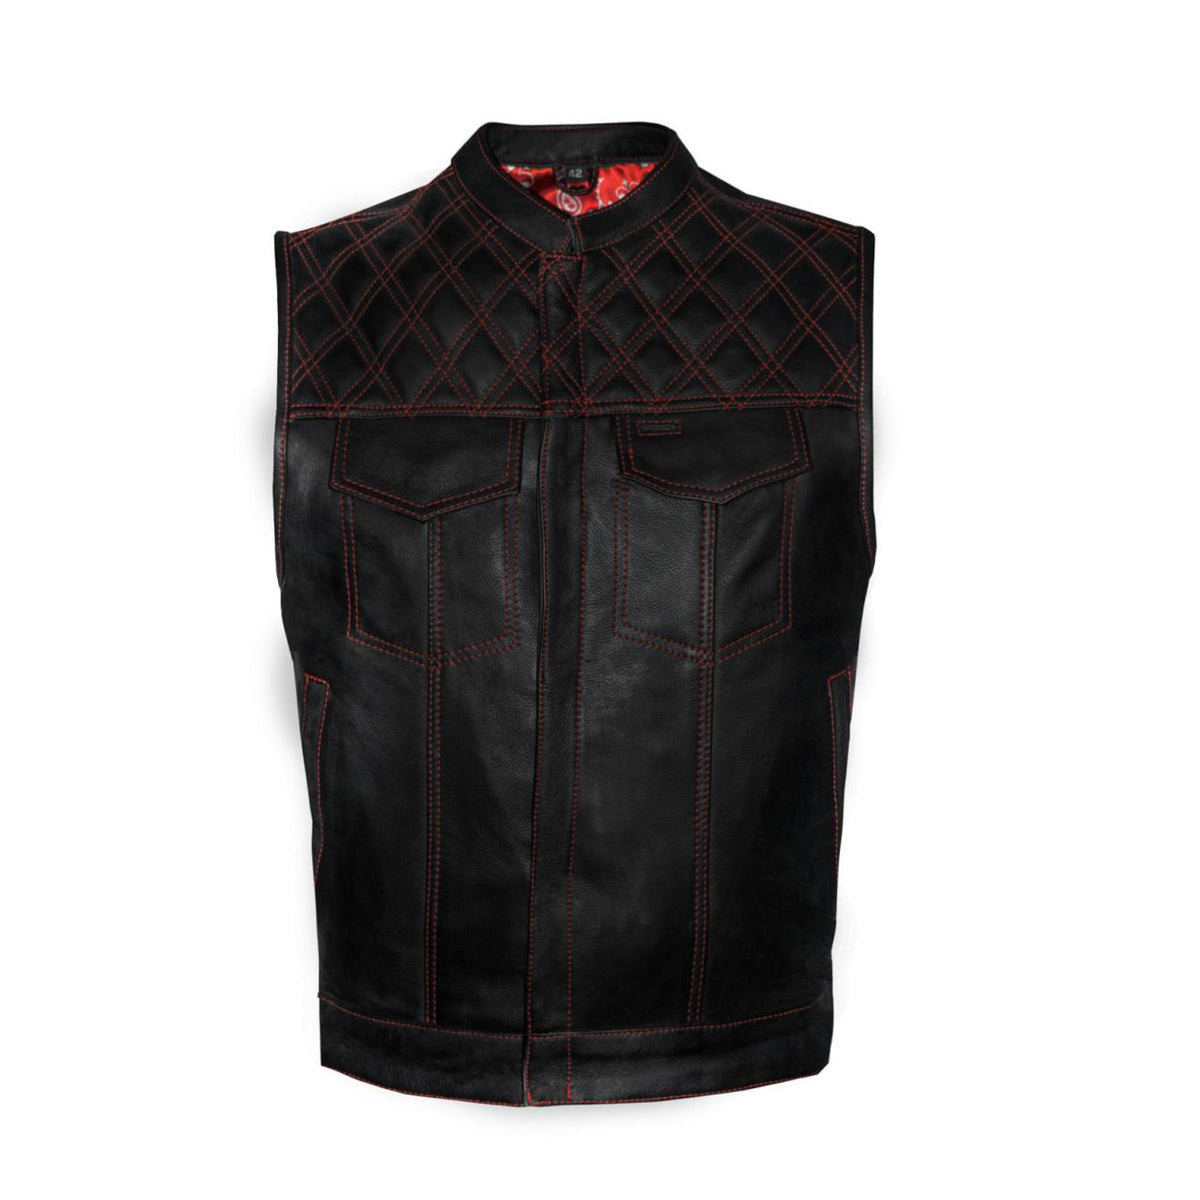 Mens Leather Club Vest Red Thread, Red Paisley Lining, Zipper Front, Diamond Padding